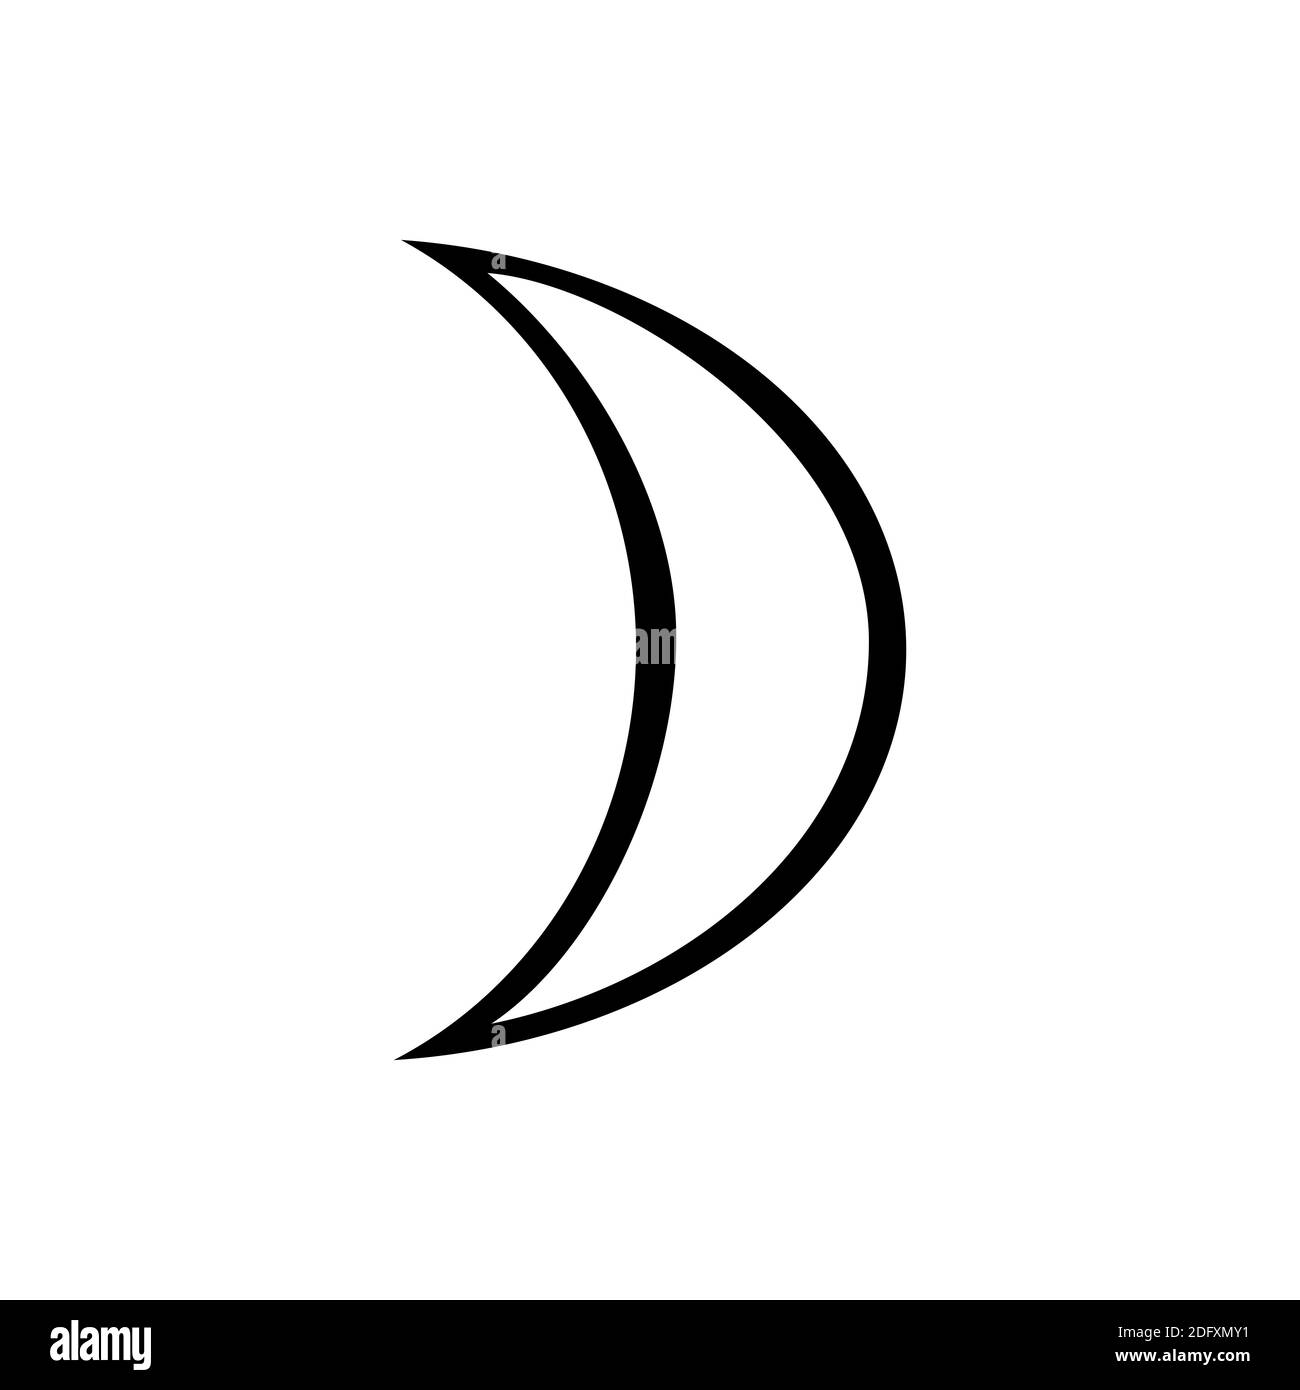 the symbol of the moon, one of the symbols of alchemy. Black and white moon icon. Stock Photo